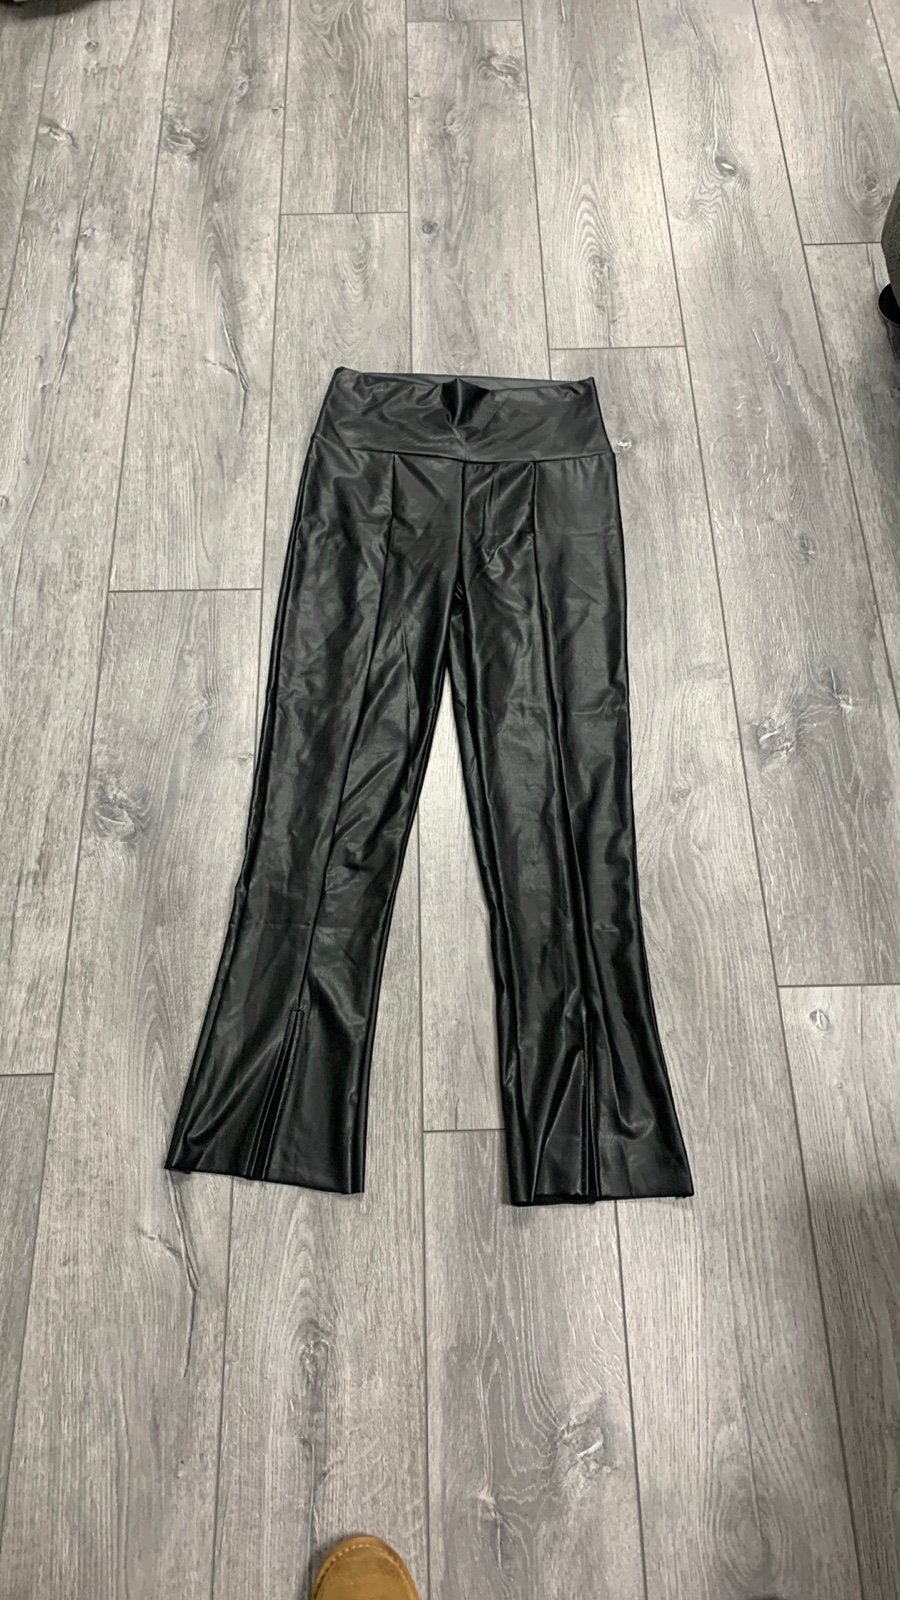 Authentic NWT BB Dakota Faux Wide Waistband Leather Pants with Slits in Front Size L. In e phofNcsWM Zero Profit 